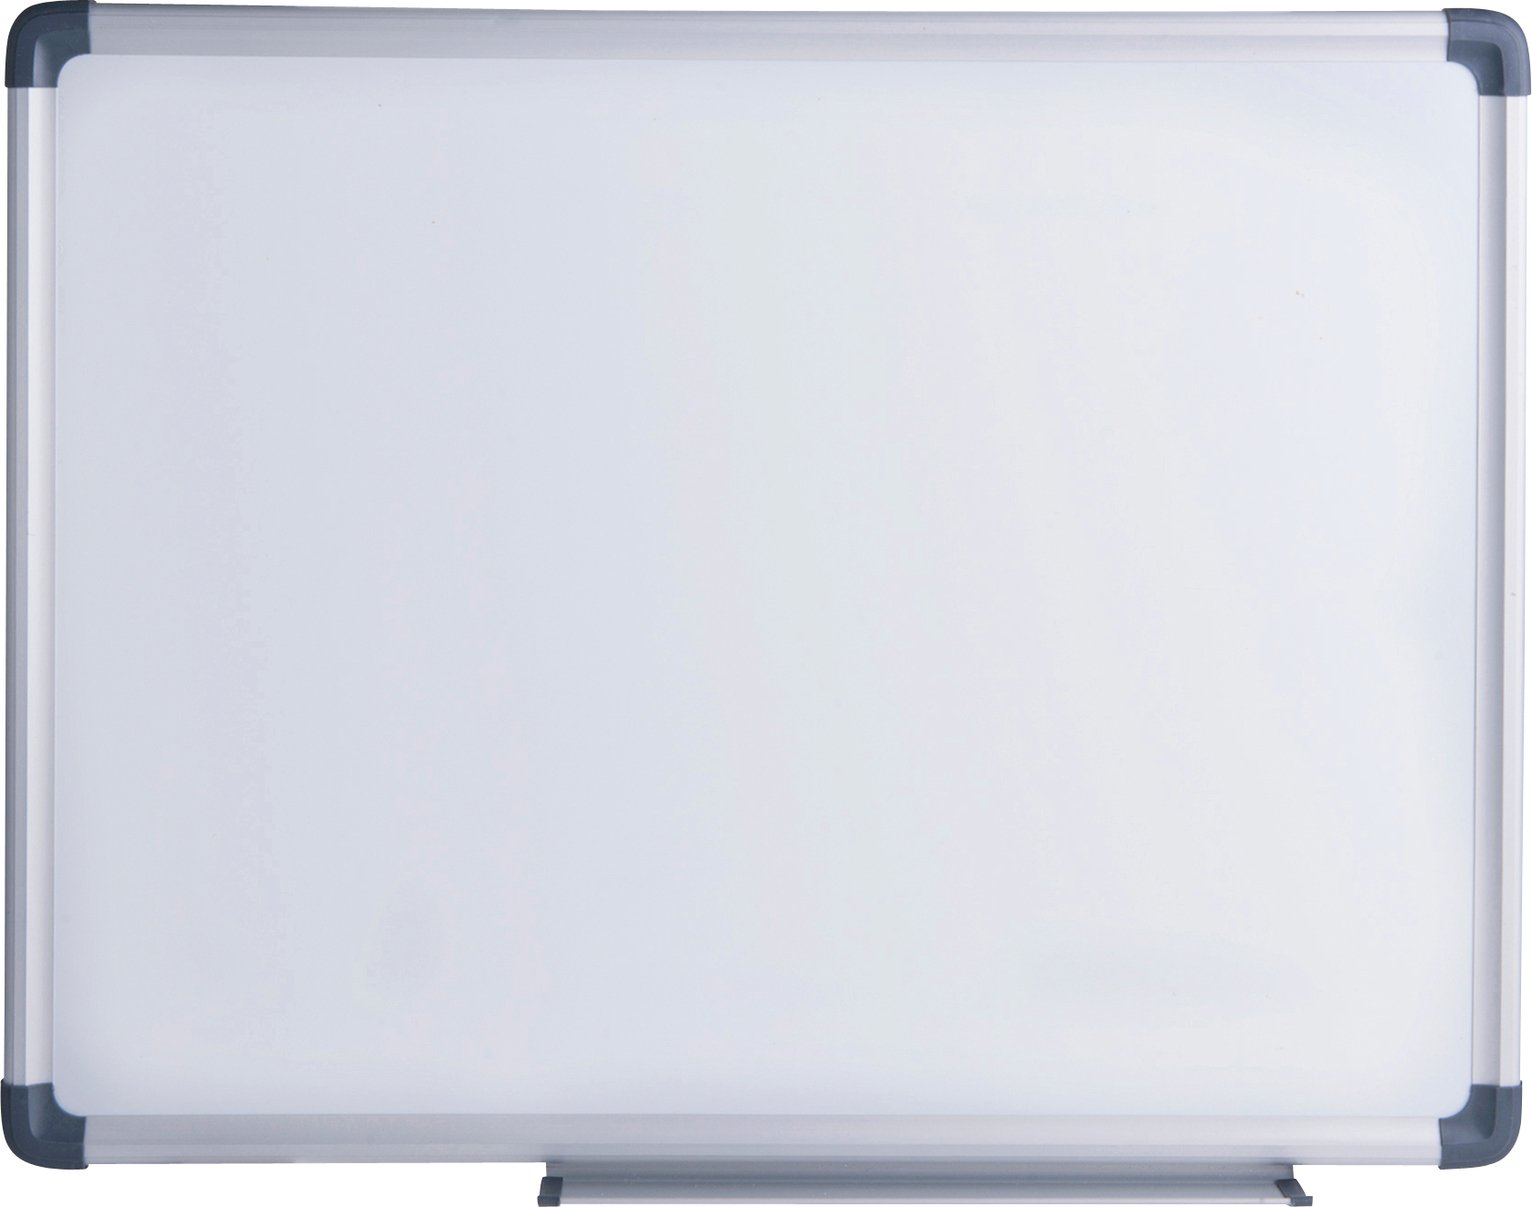 Cathedral Magnetic Whiteboard 45 x 60cm Review